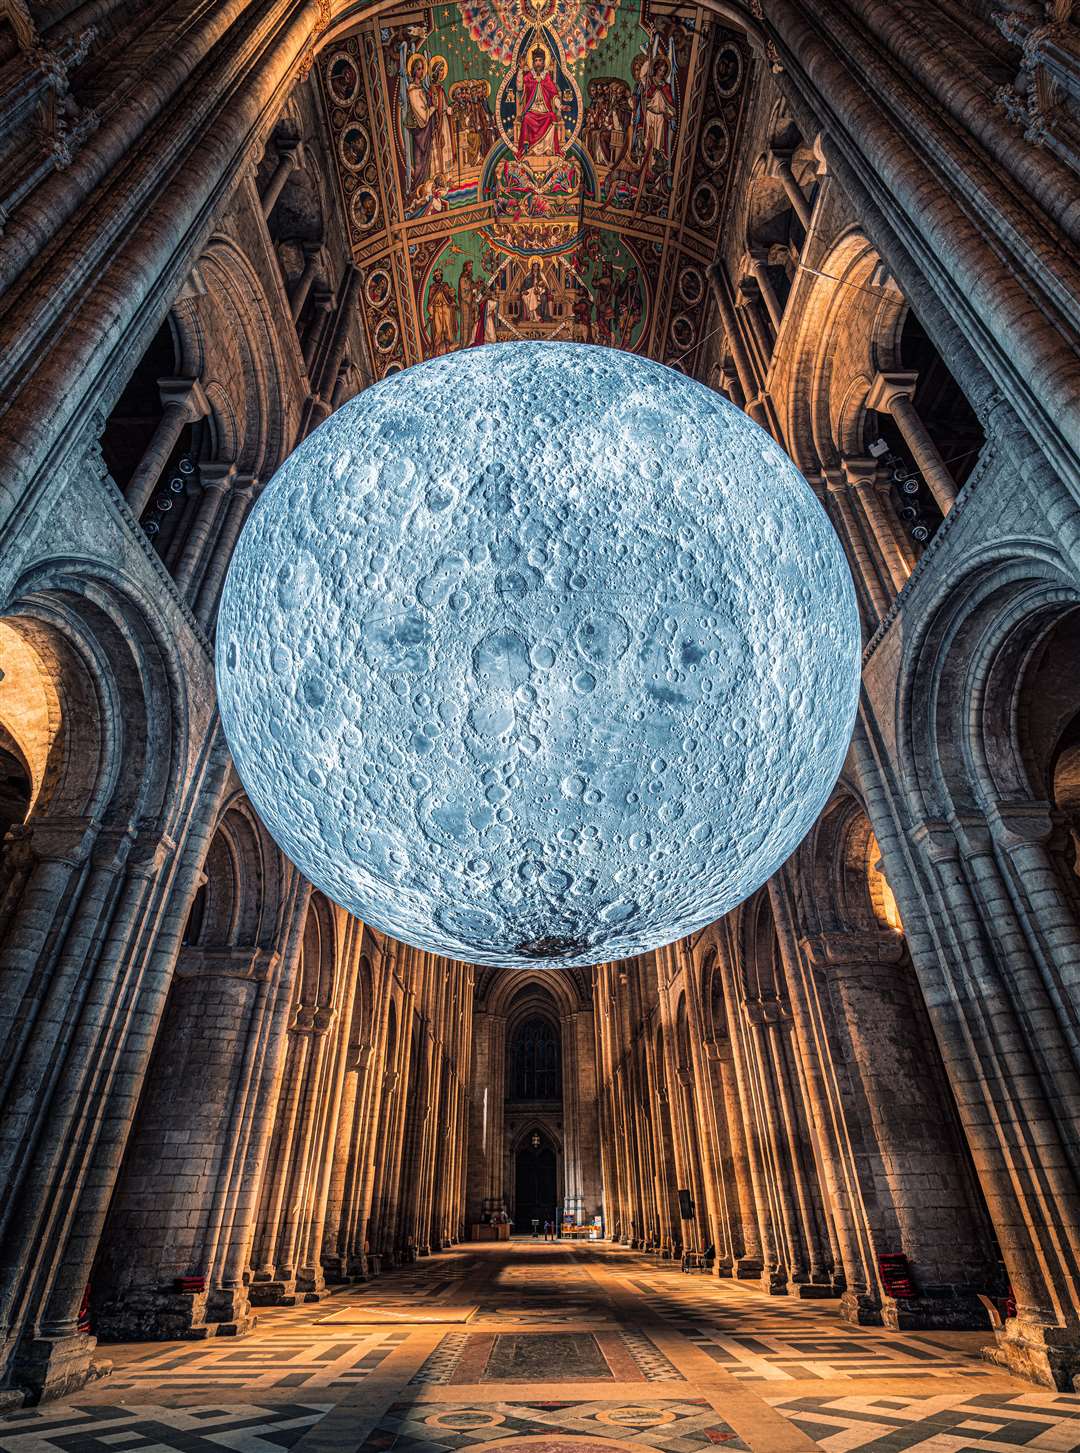 The Museum of the Moon is coming to Rochester Picture: James Billings